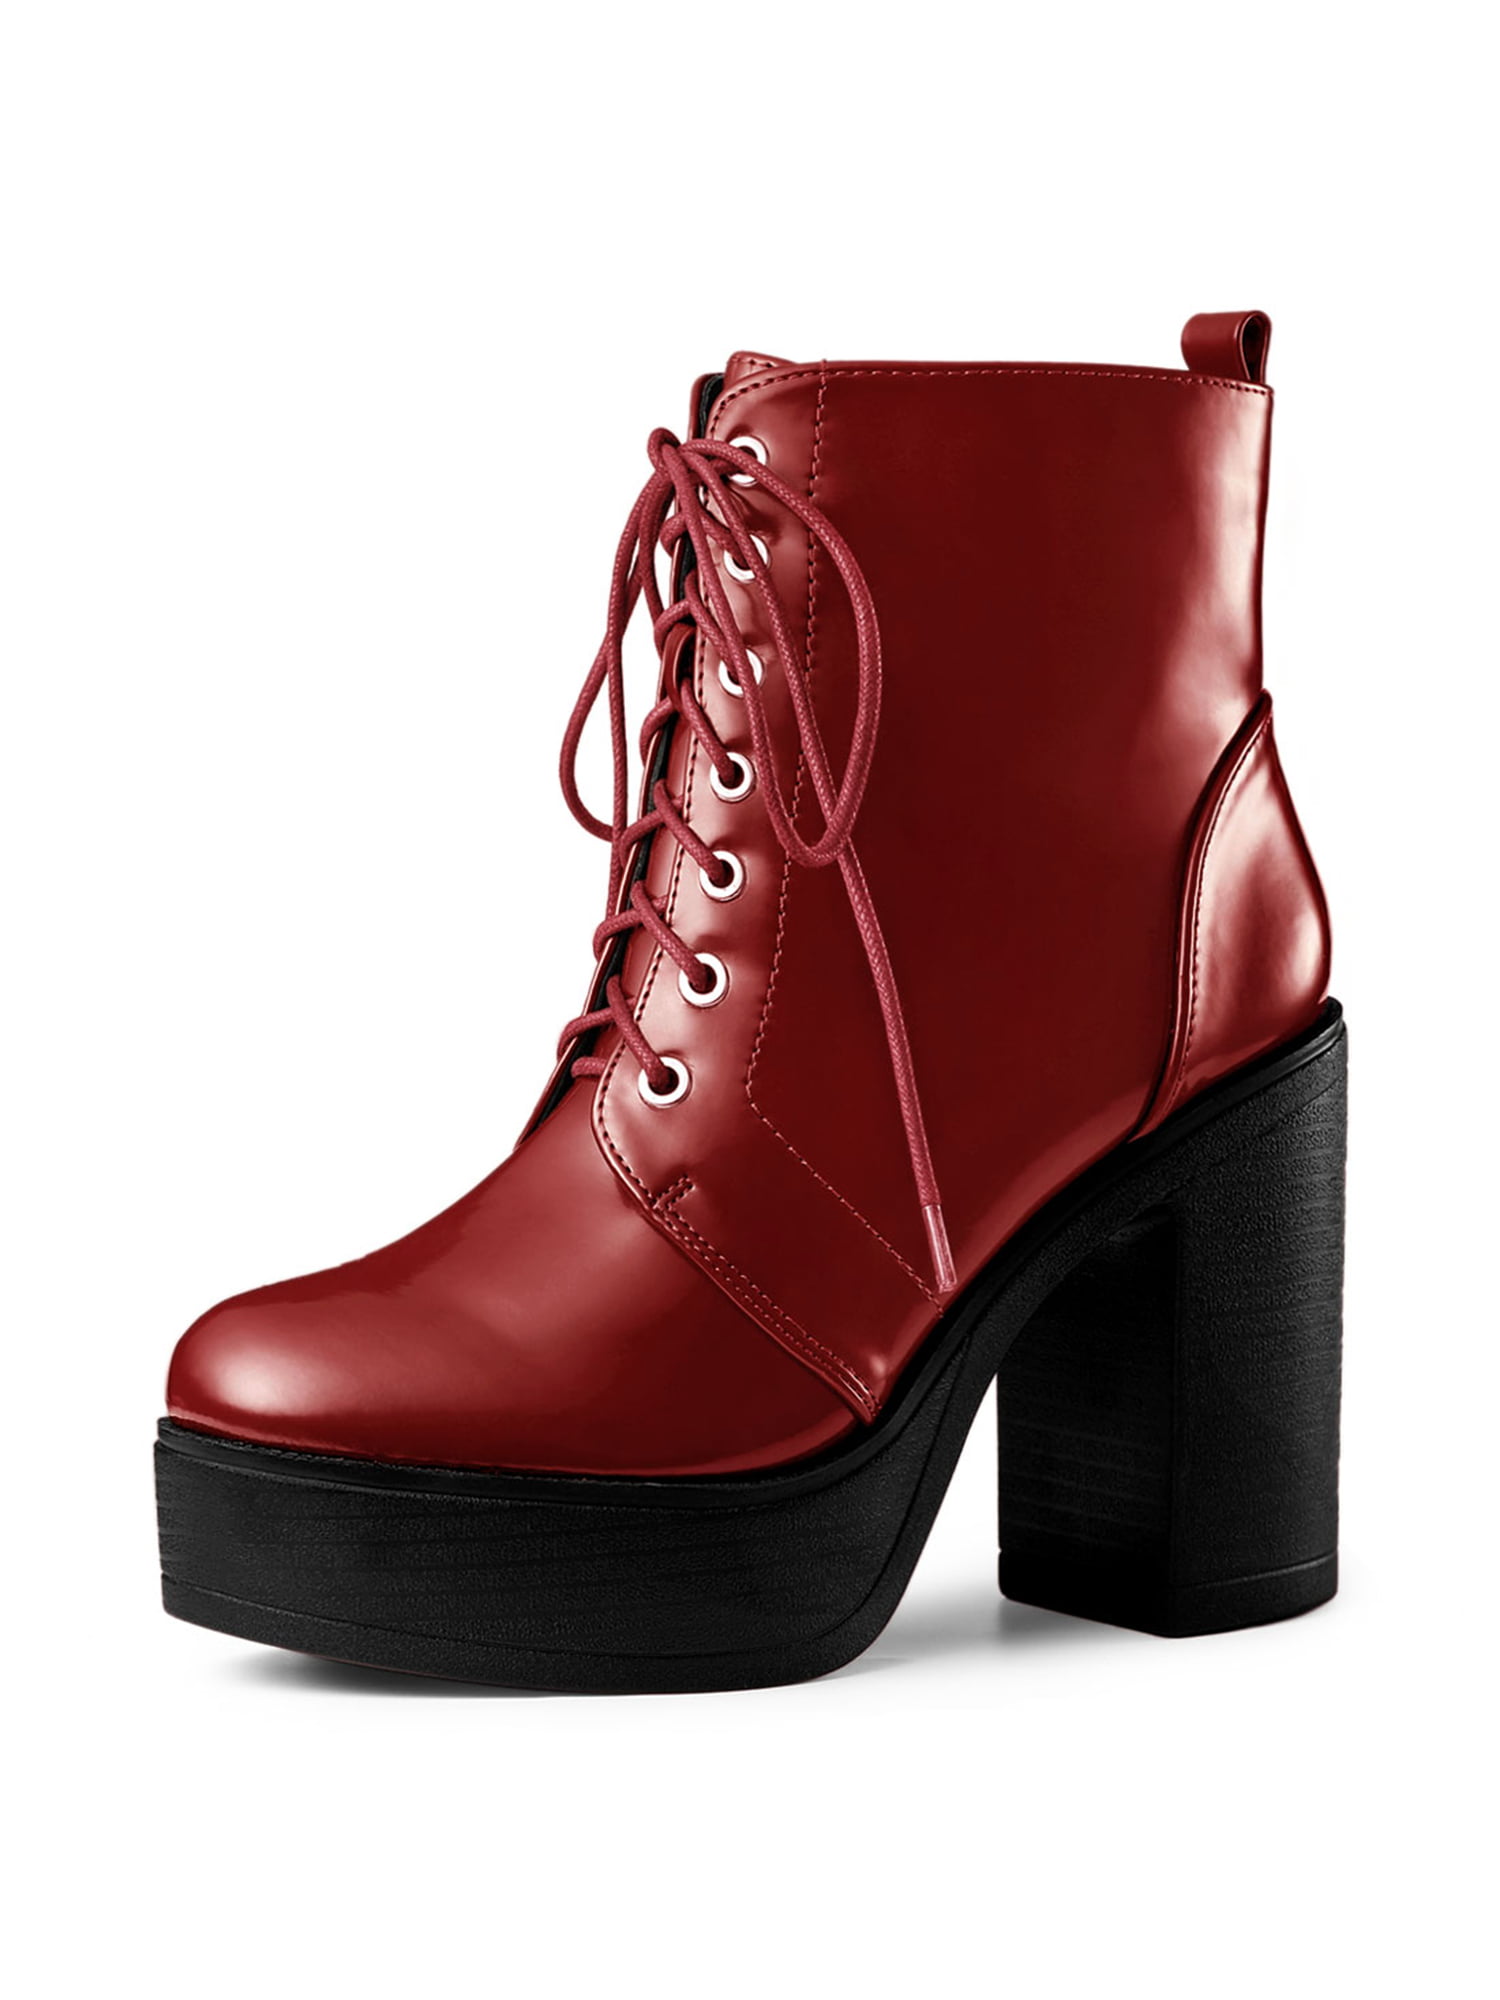 Details about   Women's Ankle Boots Platform Side Zipper Round Toe Slim High Heel Booties Shoes 